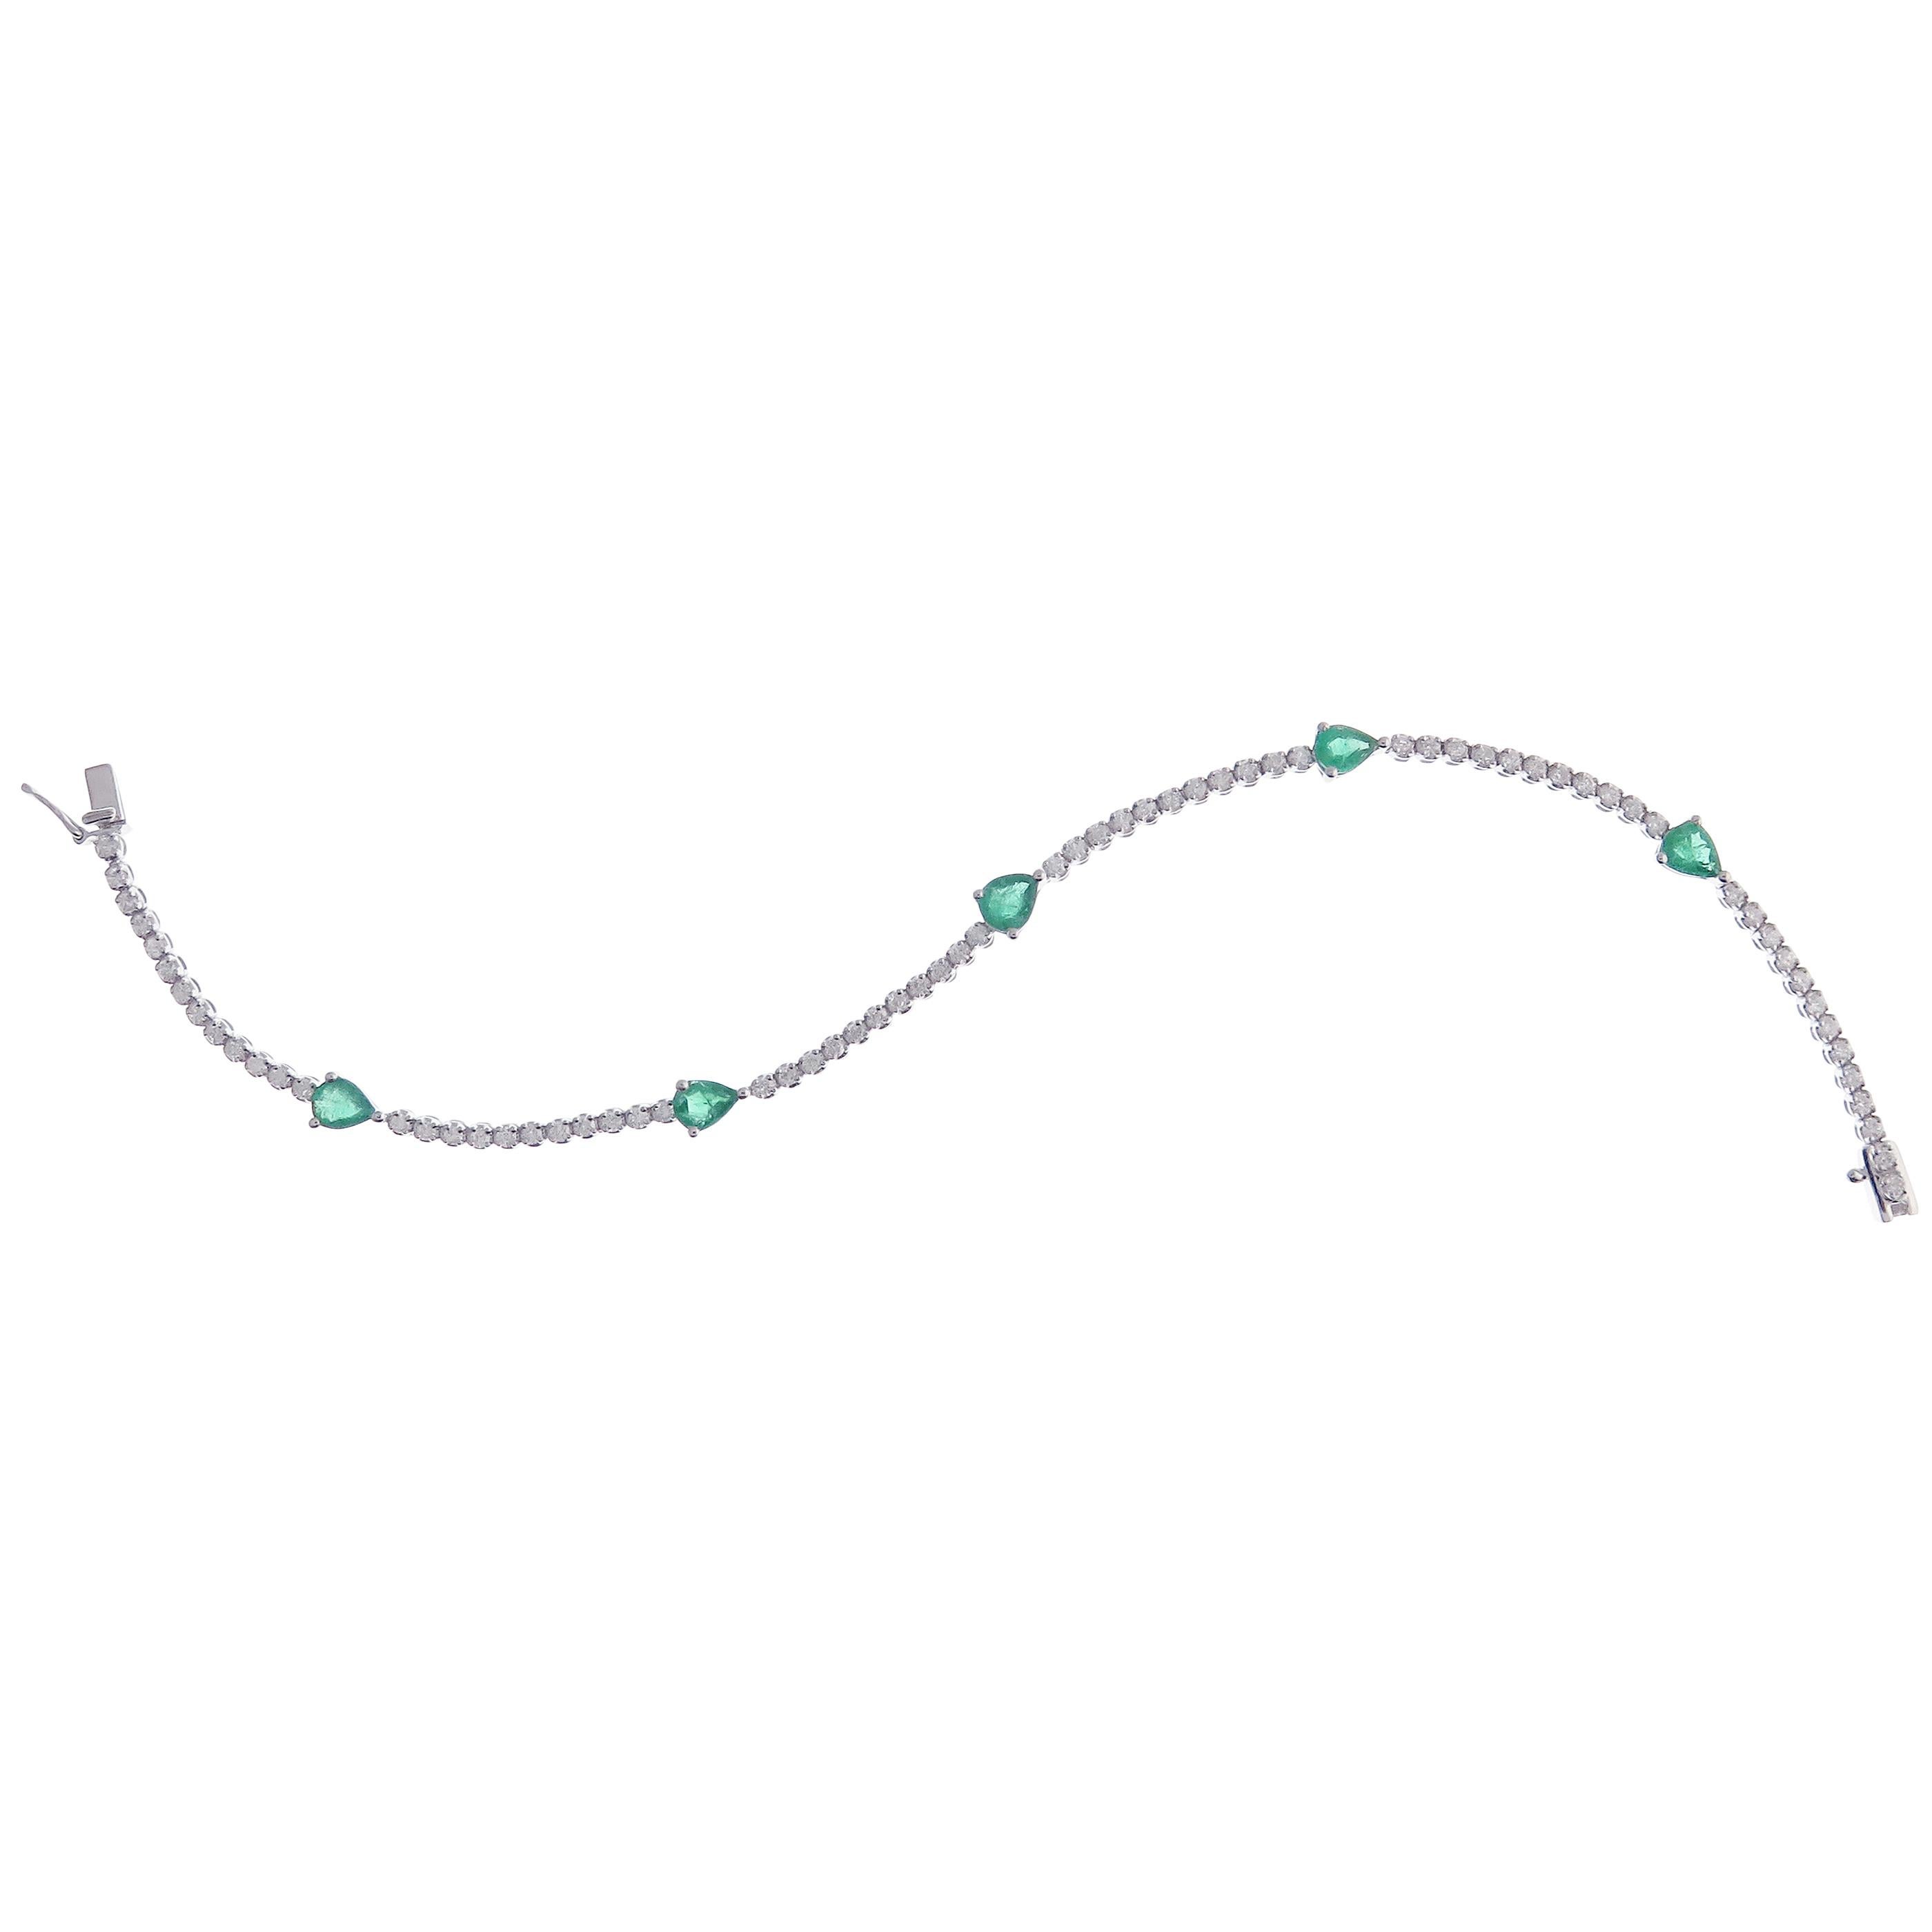 This white diamond and pear shape emerald line tennis bracelet is crafted in 18-karat white gold, featuring 70 round diamonds totaling of 1.10 carats VS quality, 5 pear shape emerald totaling of approximate 1.35 carats.

Bracelet is approximately 7